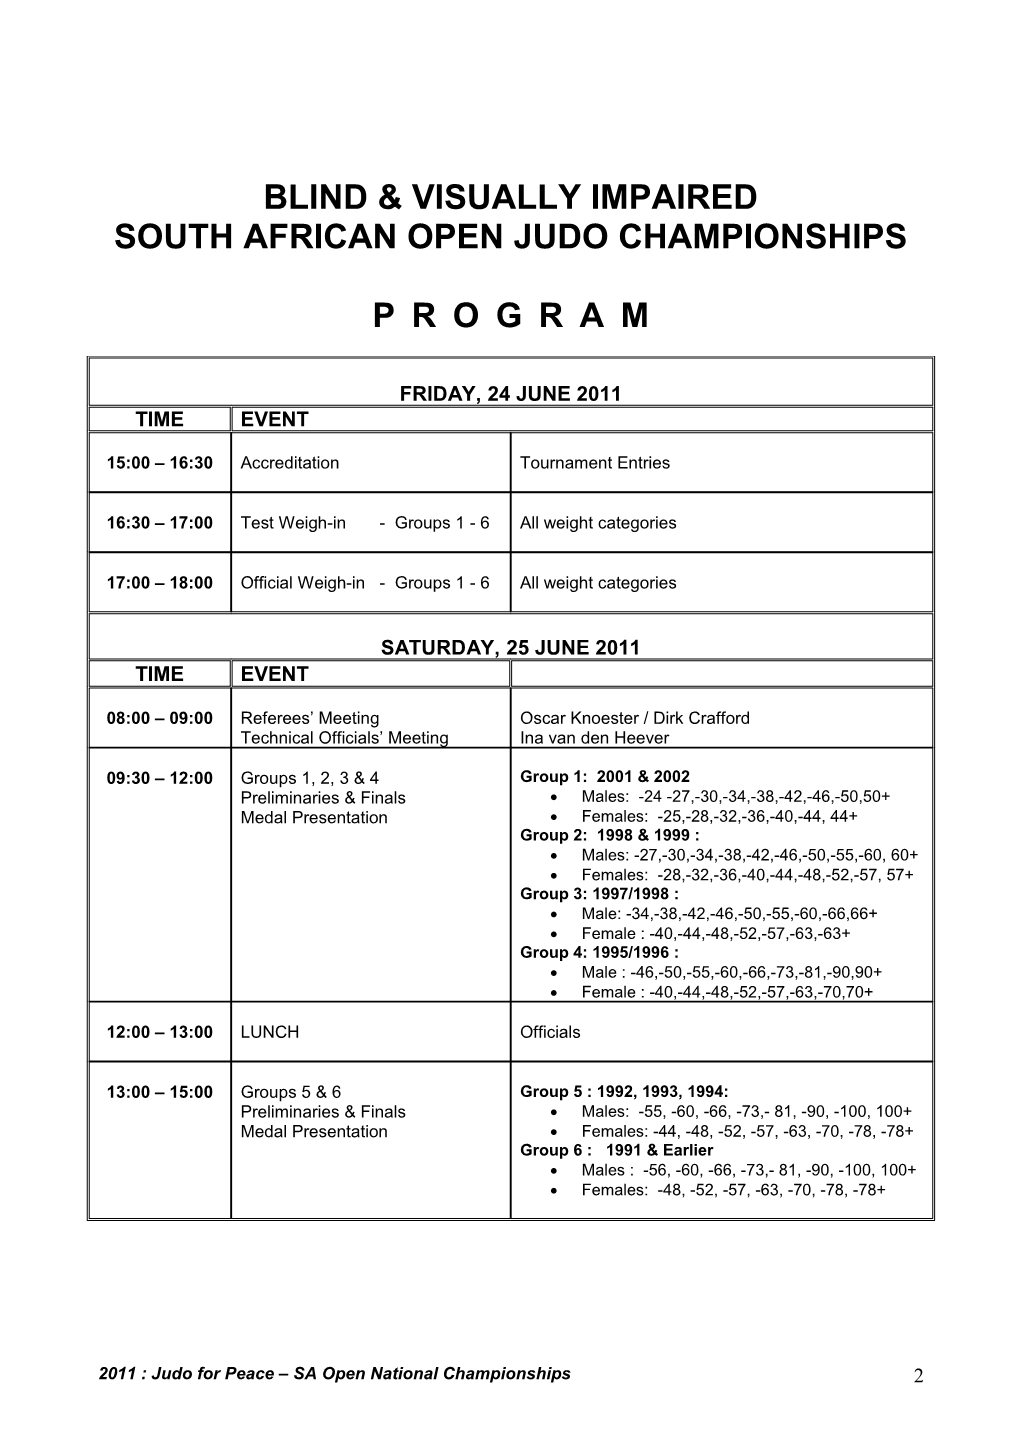 South African Open Judochampionships